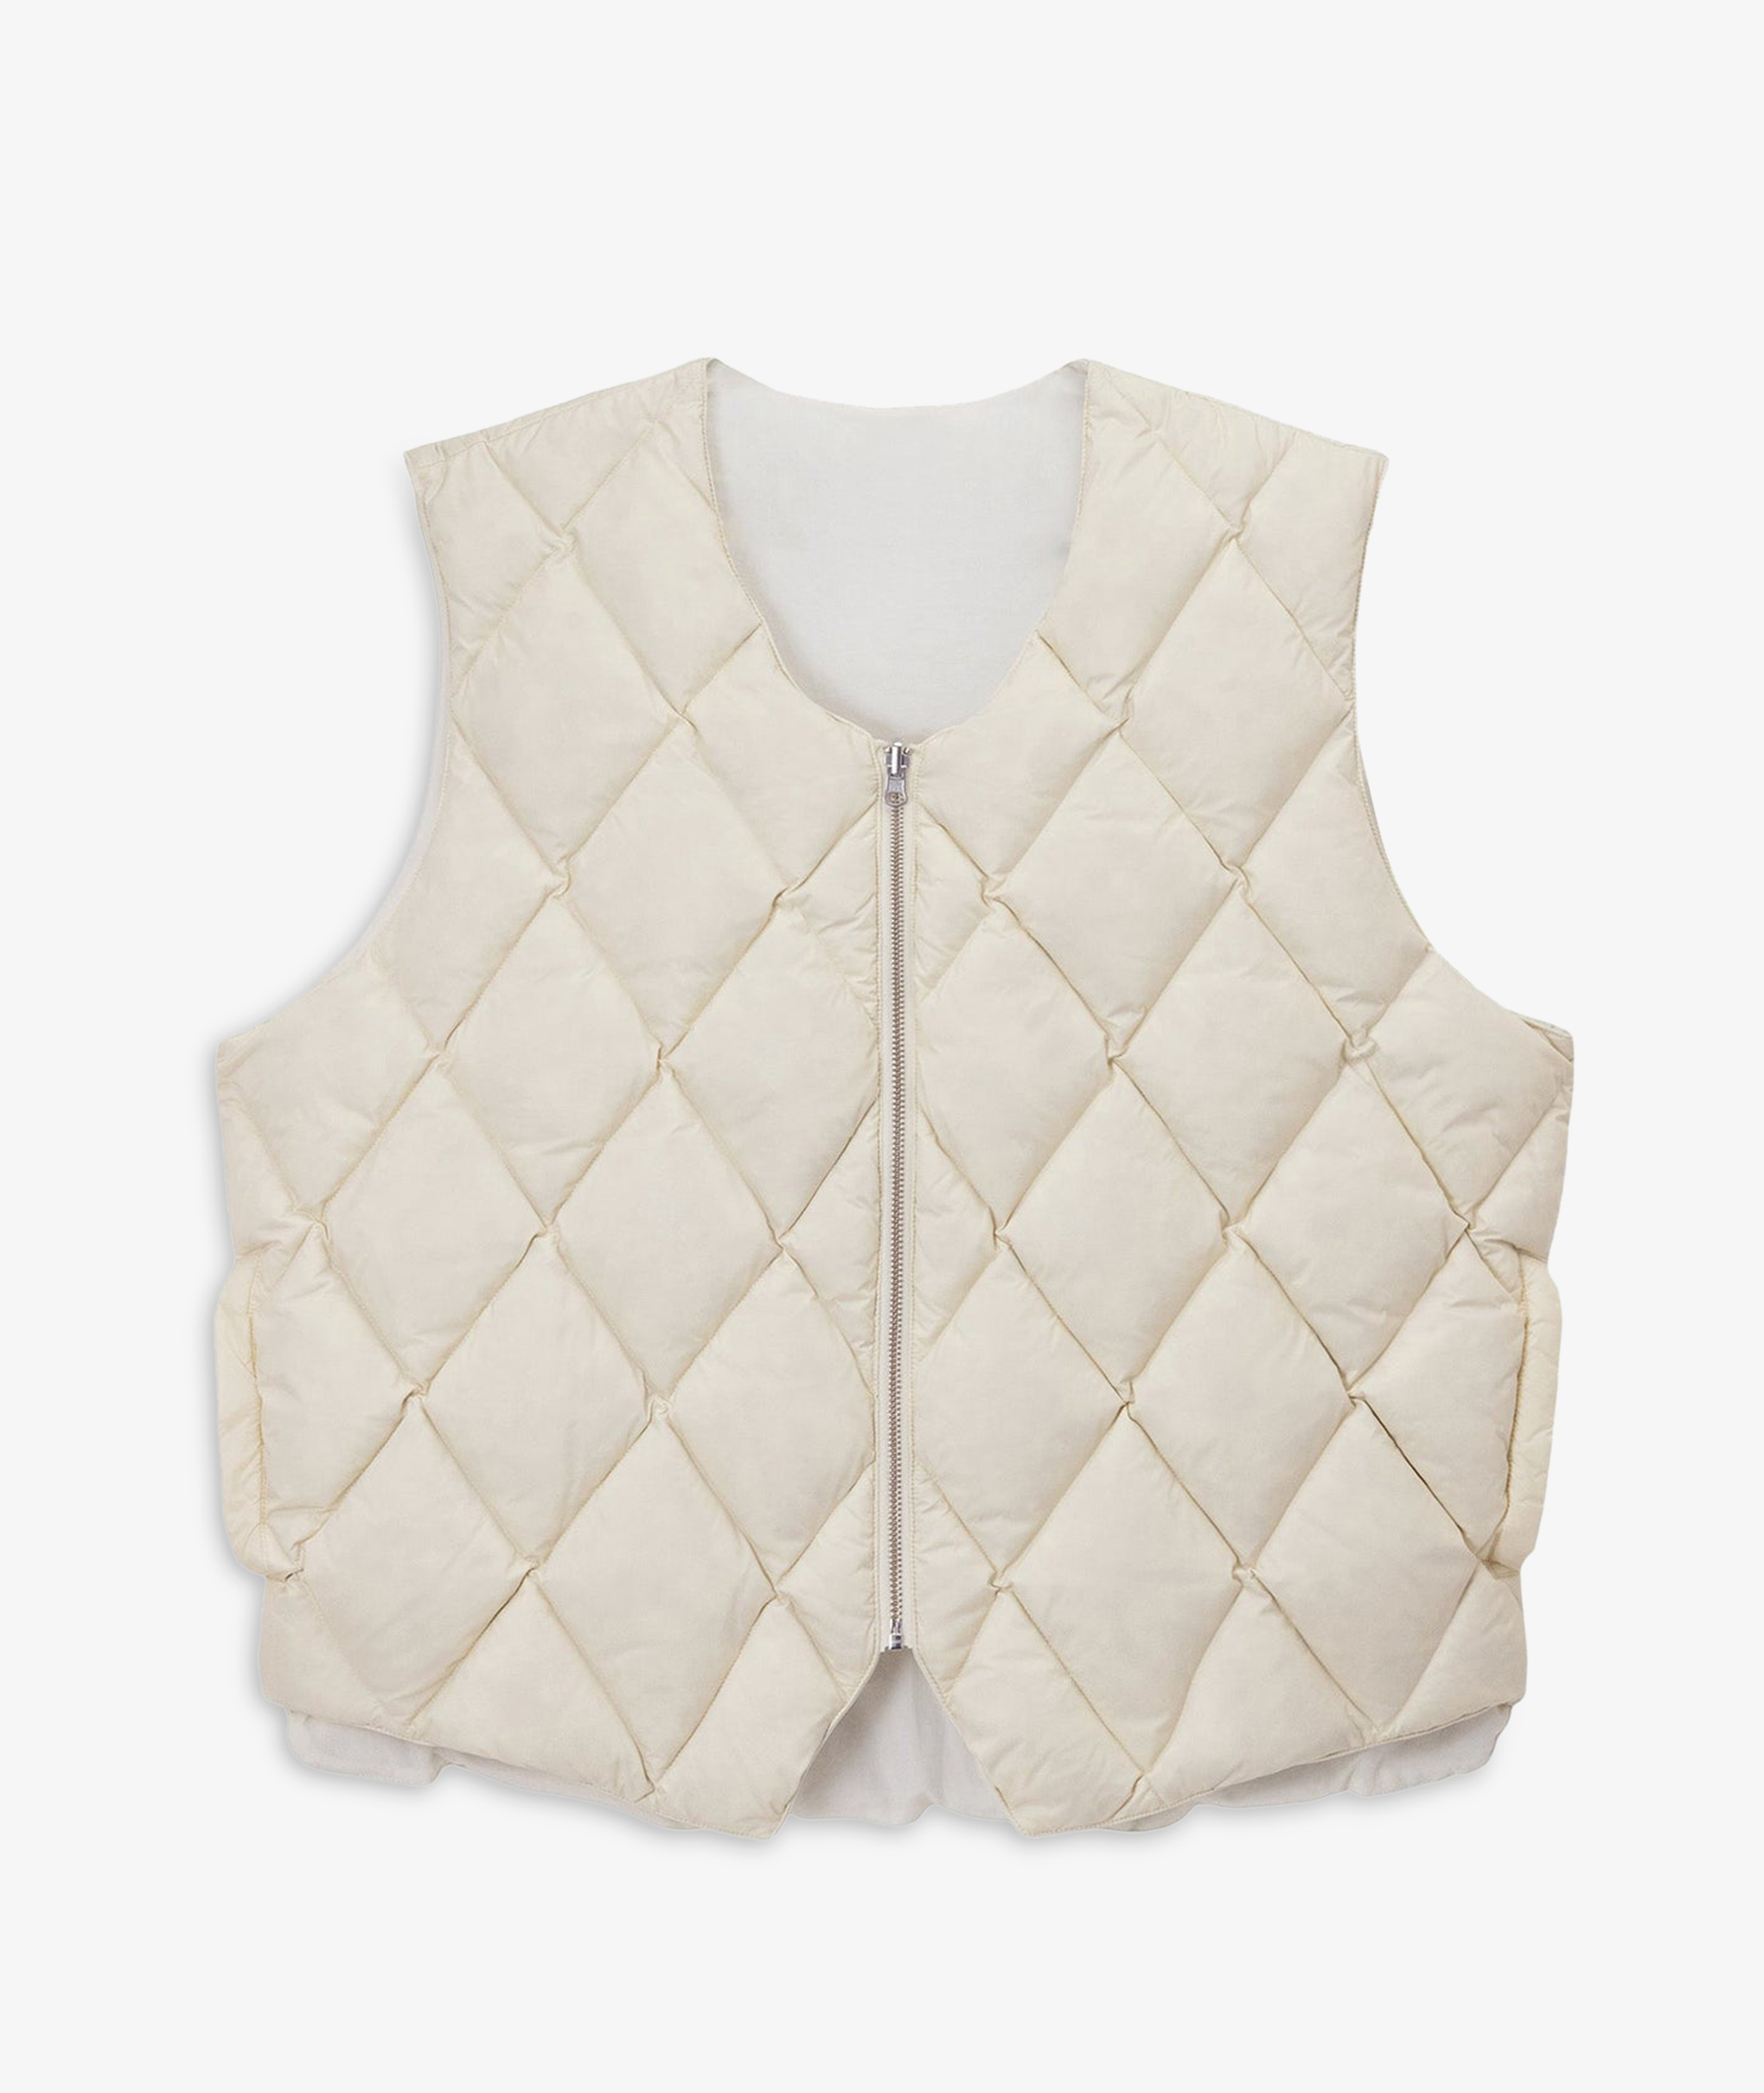 Norse Store | Shipping Worldwide - Stüssy Reversible Quilted Vest